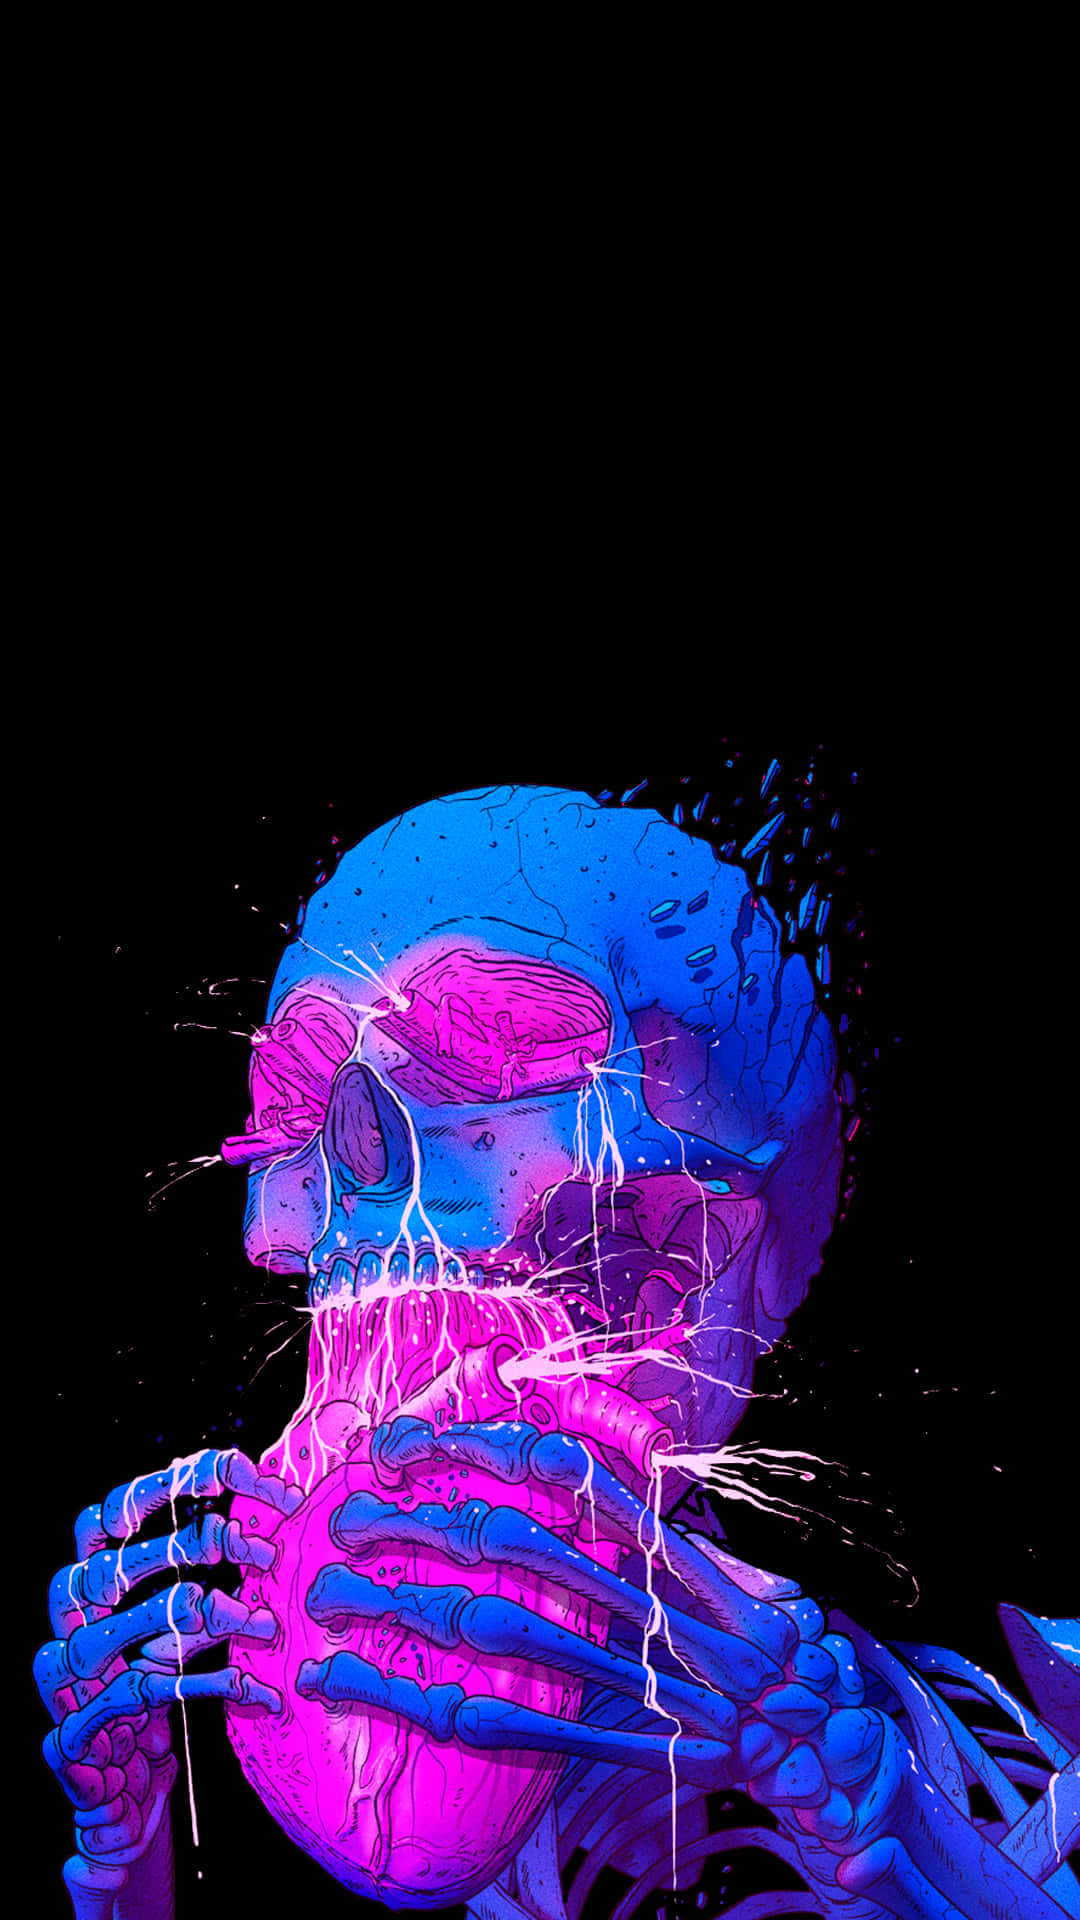 Get ahead of the game with the newest Skull Phone Wallpaper